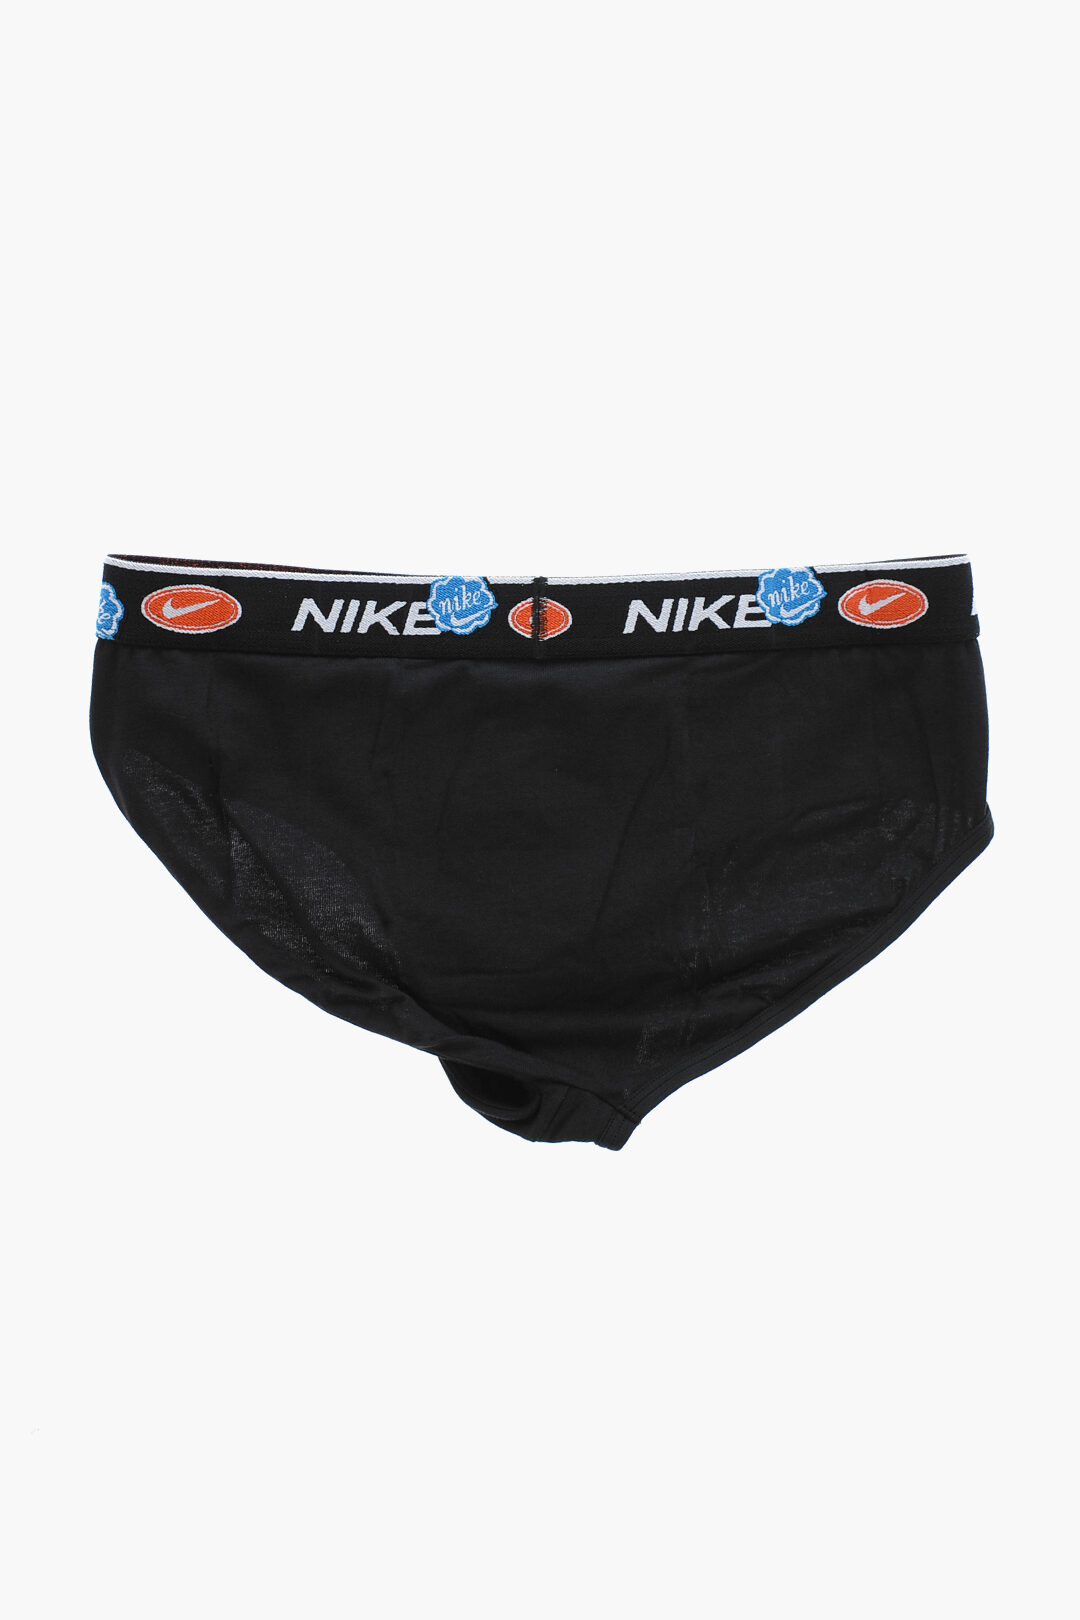 Nike Set of 3 Stretch Cotton Briefs with Logoed Elastic Band men